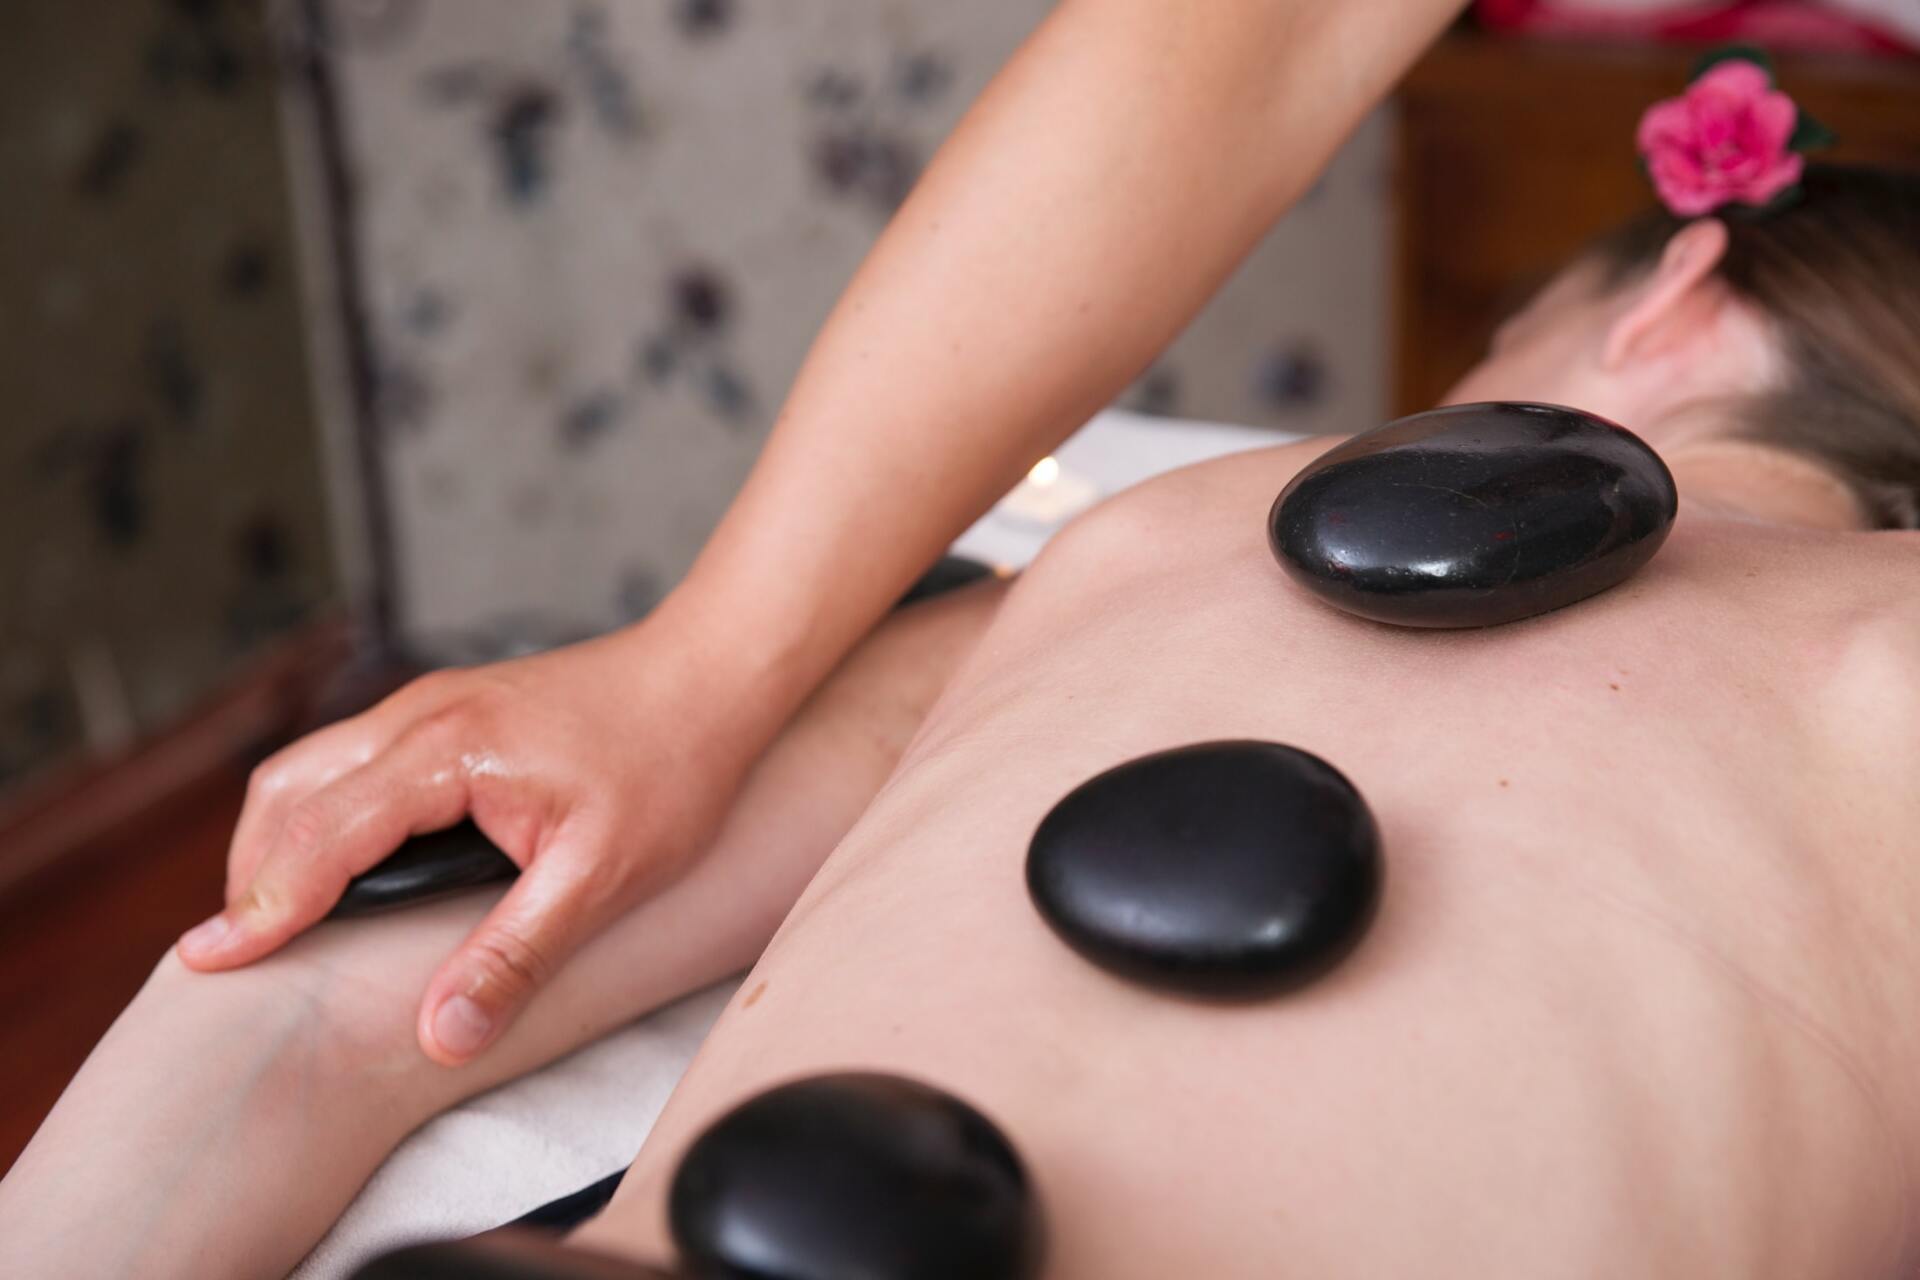 HOT STONE THERAPY massage at Coastal Massage and Bodywork Outer Banks